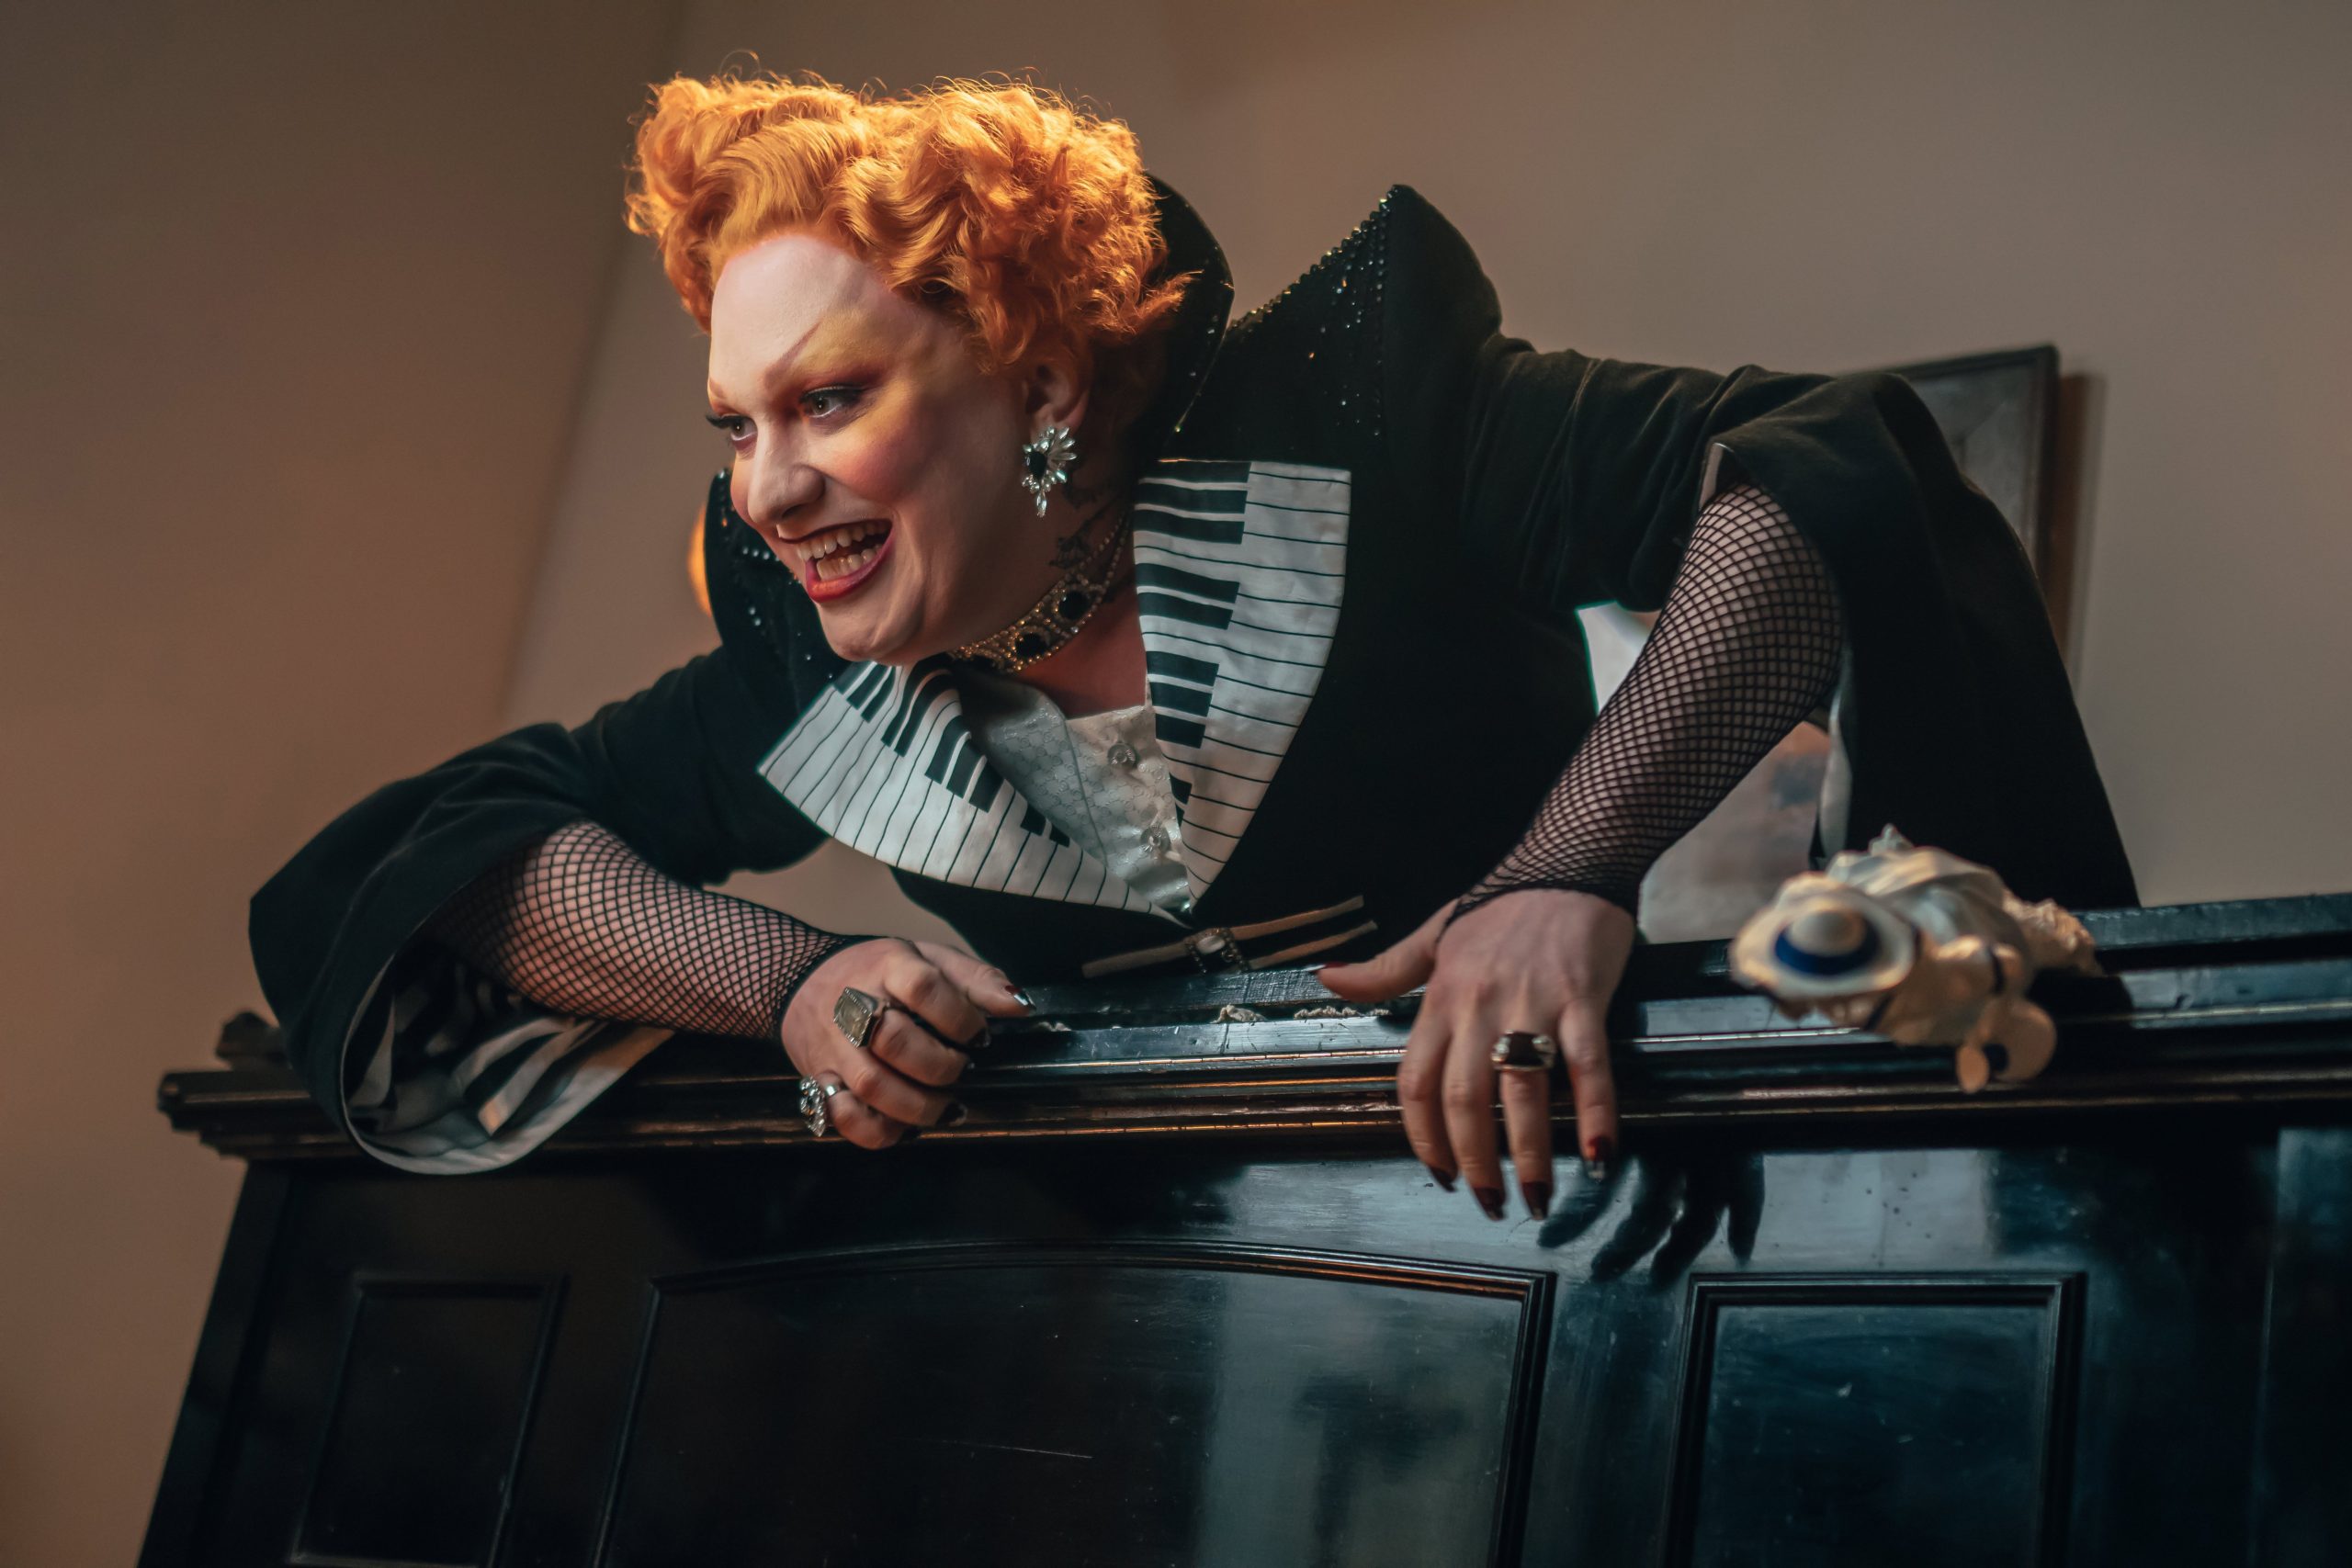 Jinkx Monsoon dressed as the Maestro atop a piano